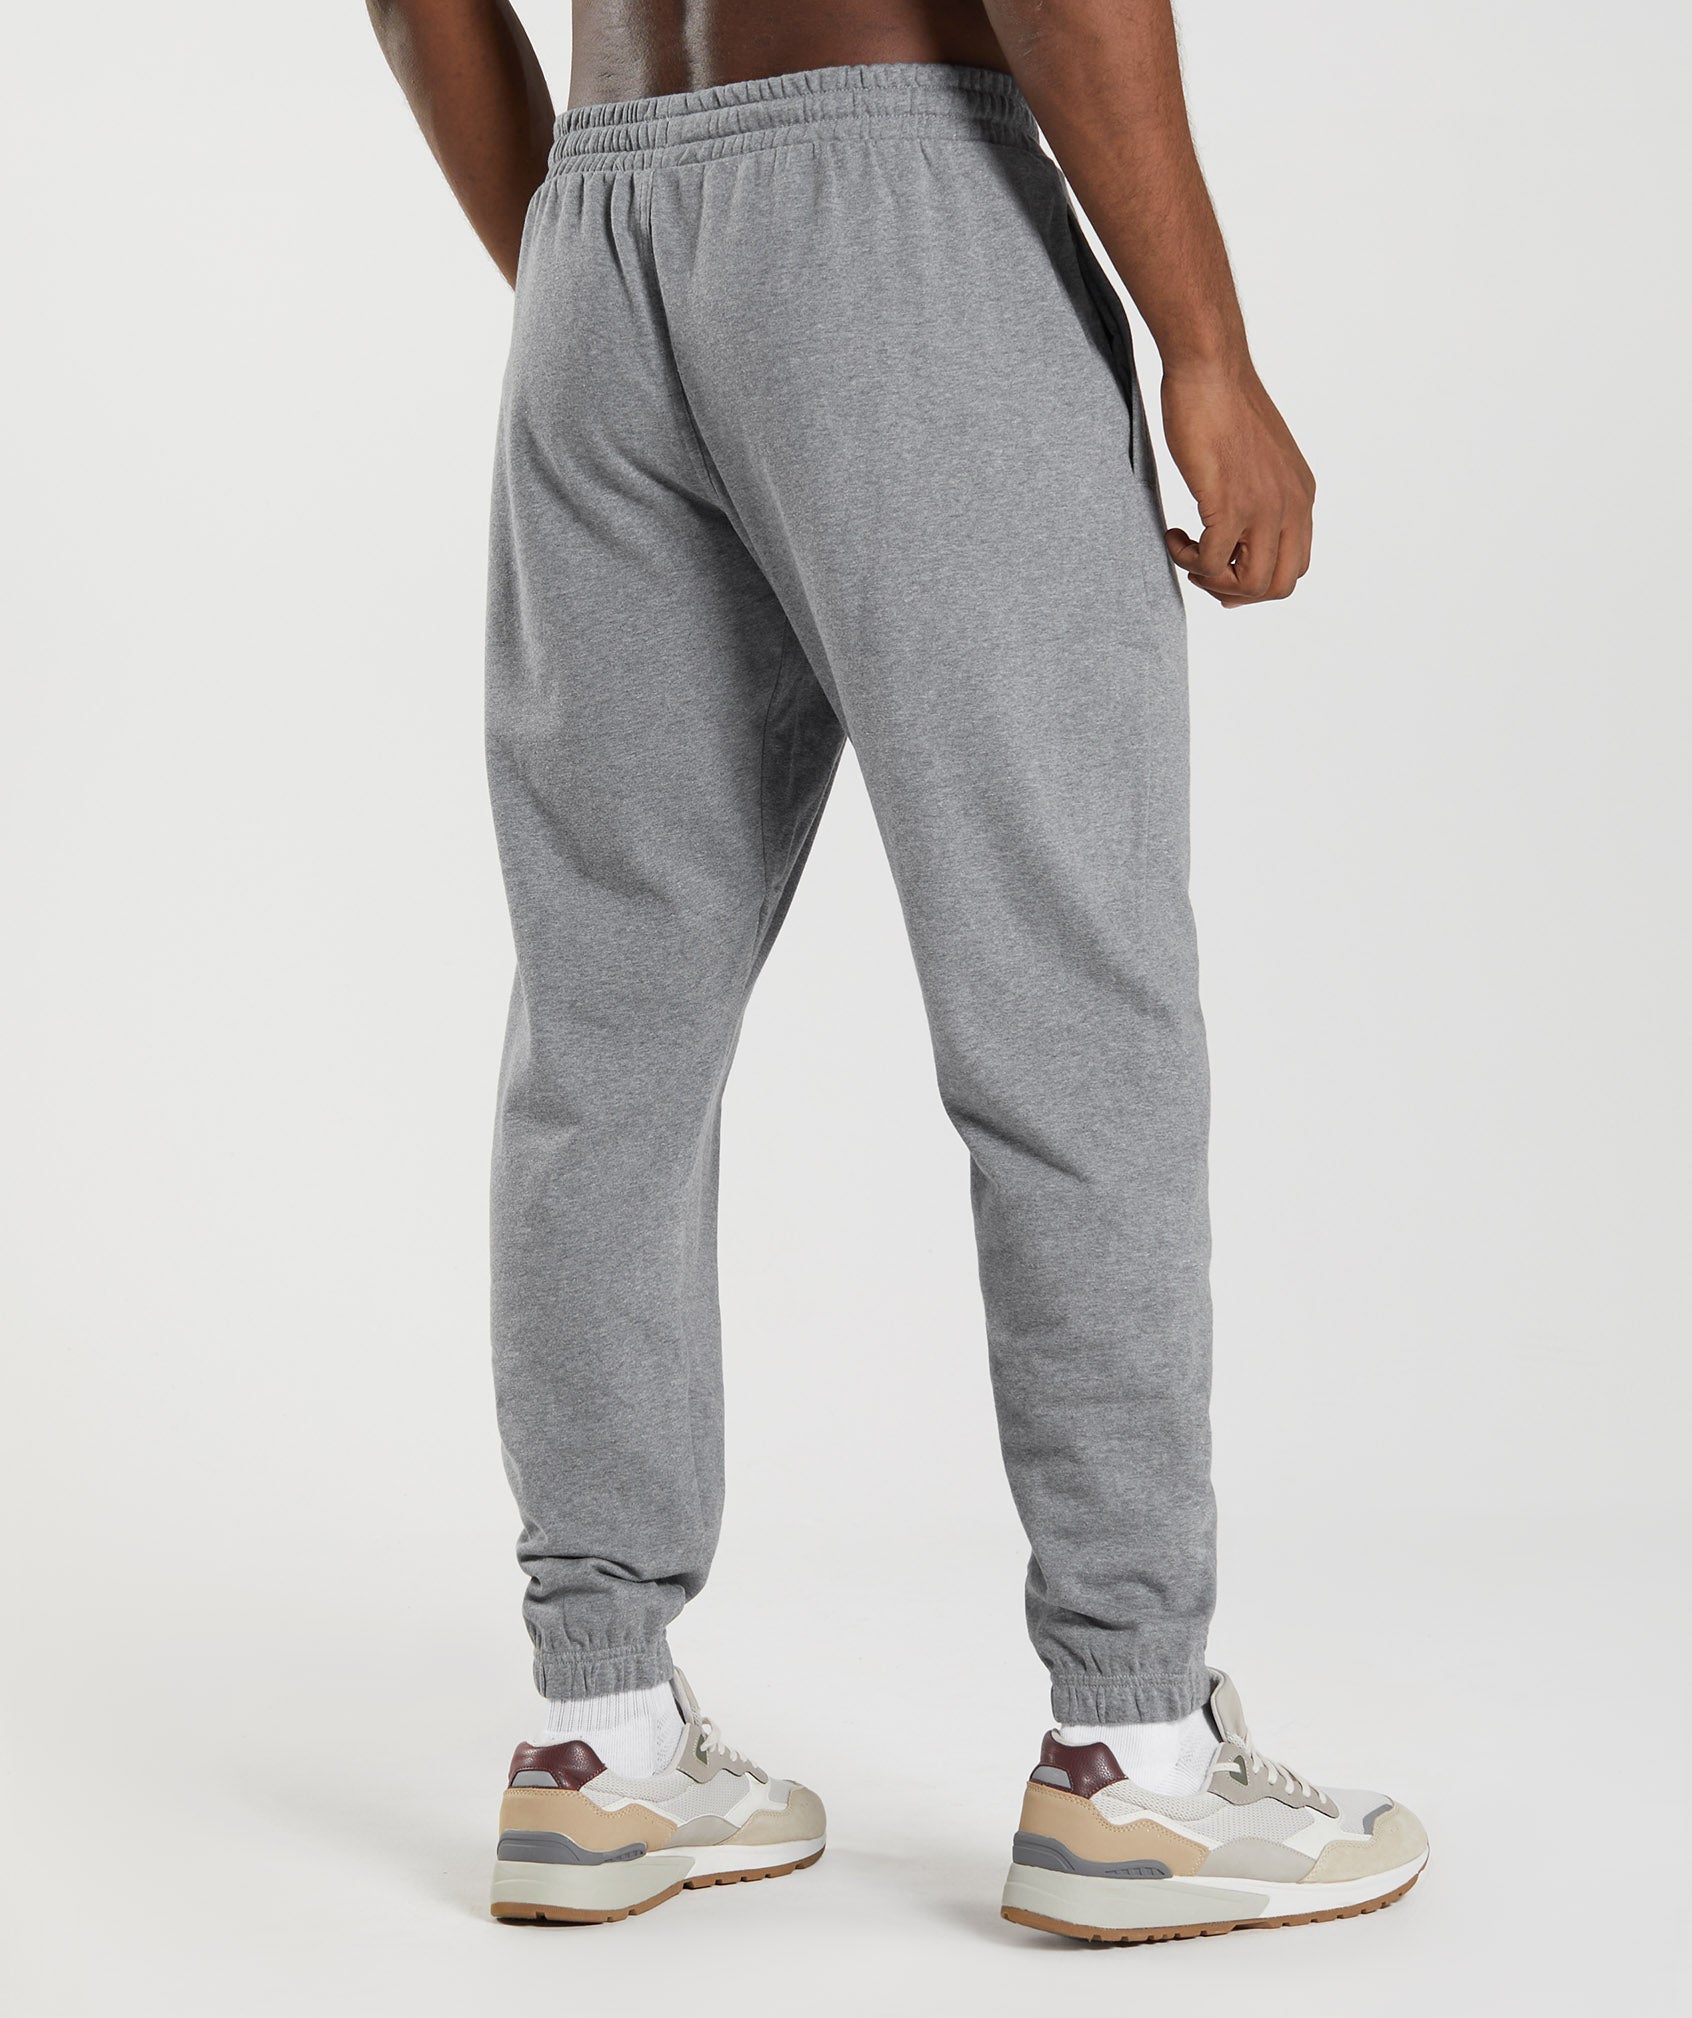 Women's Athletic Essential Jersey Flare Joggers in Cadet Grey Marl